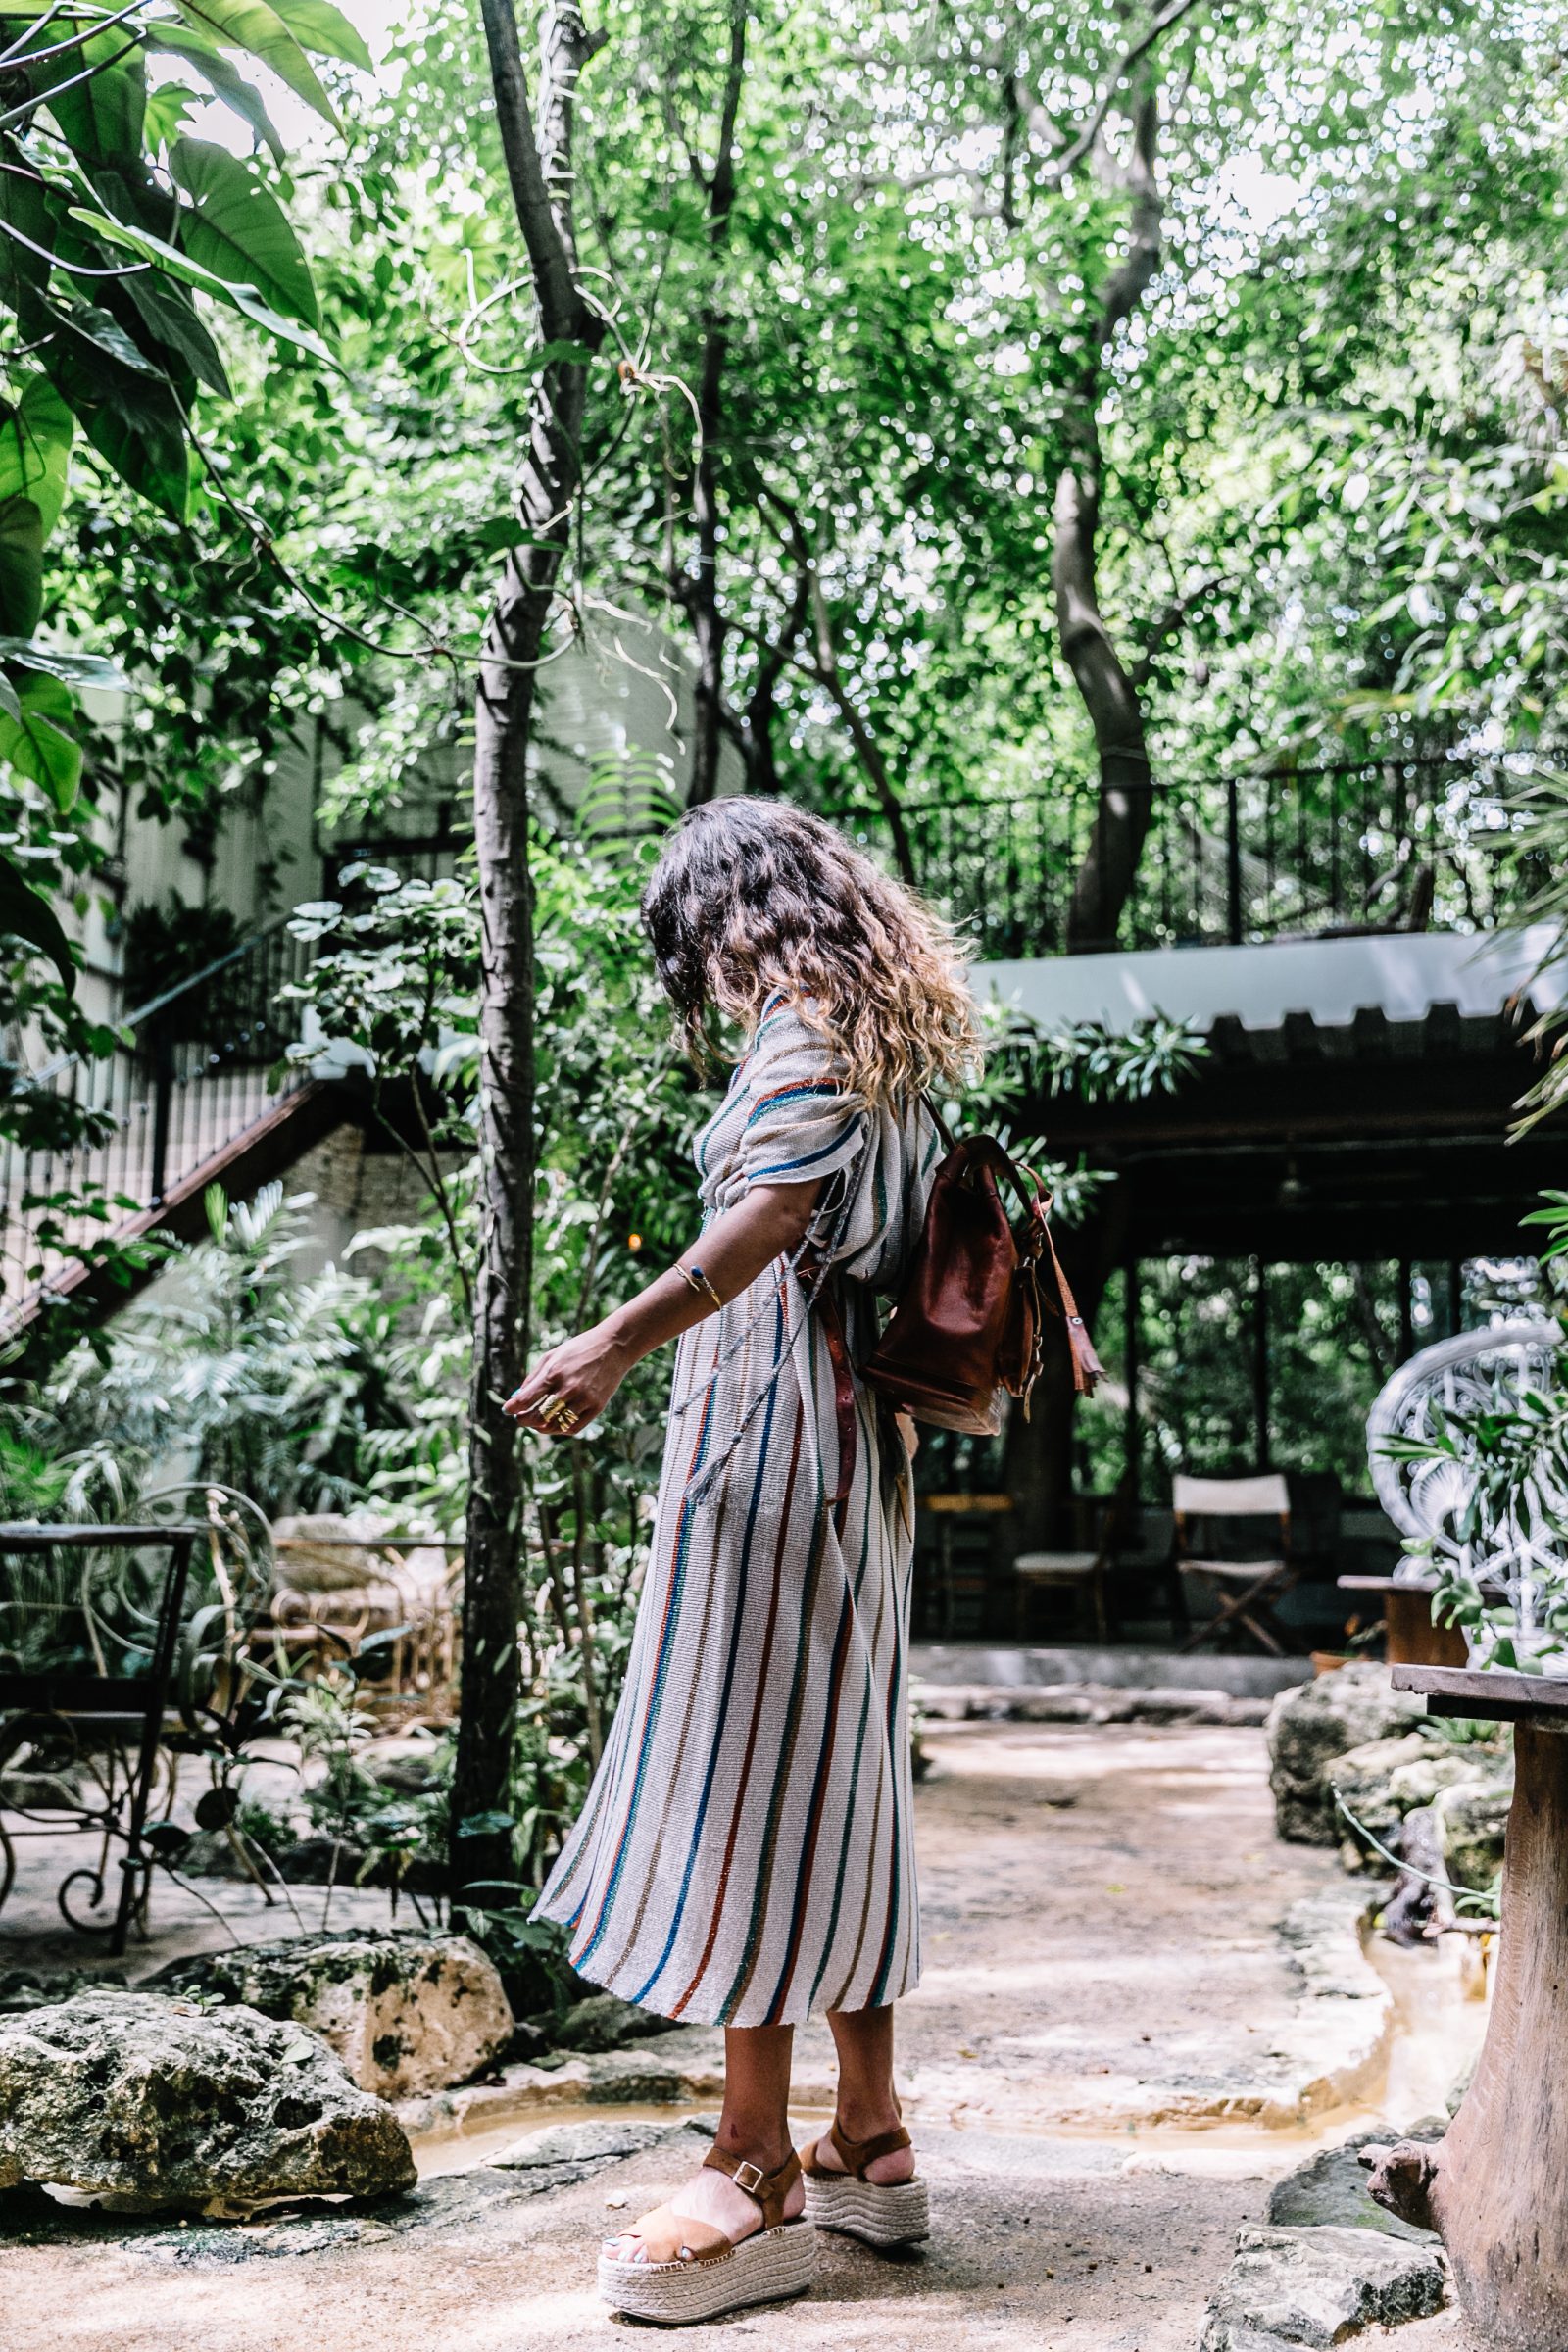 stripped_dress-leather_backpack-suede_espadrilles-mayan_ruins-hotel_esencia-sanara_tulum-beach-mexico-outfit-collage_vintage-6